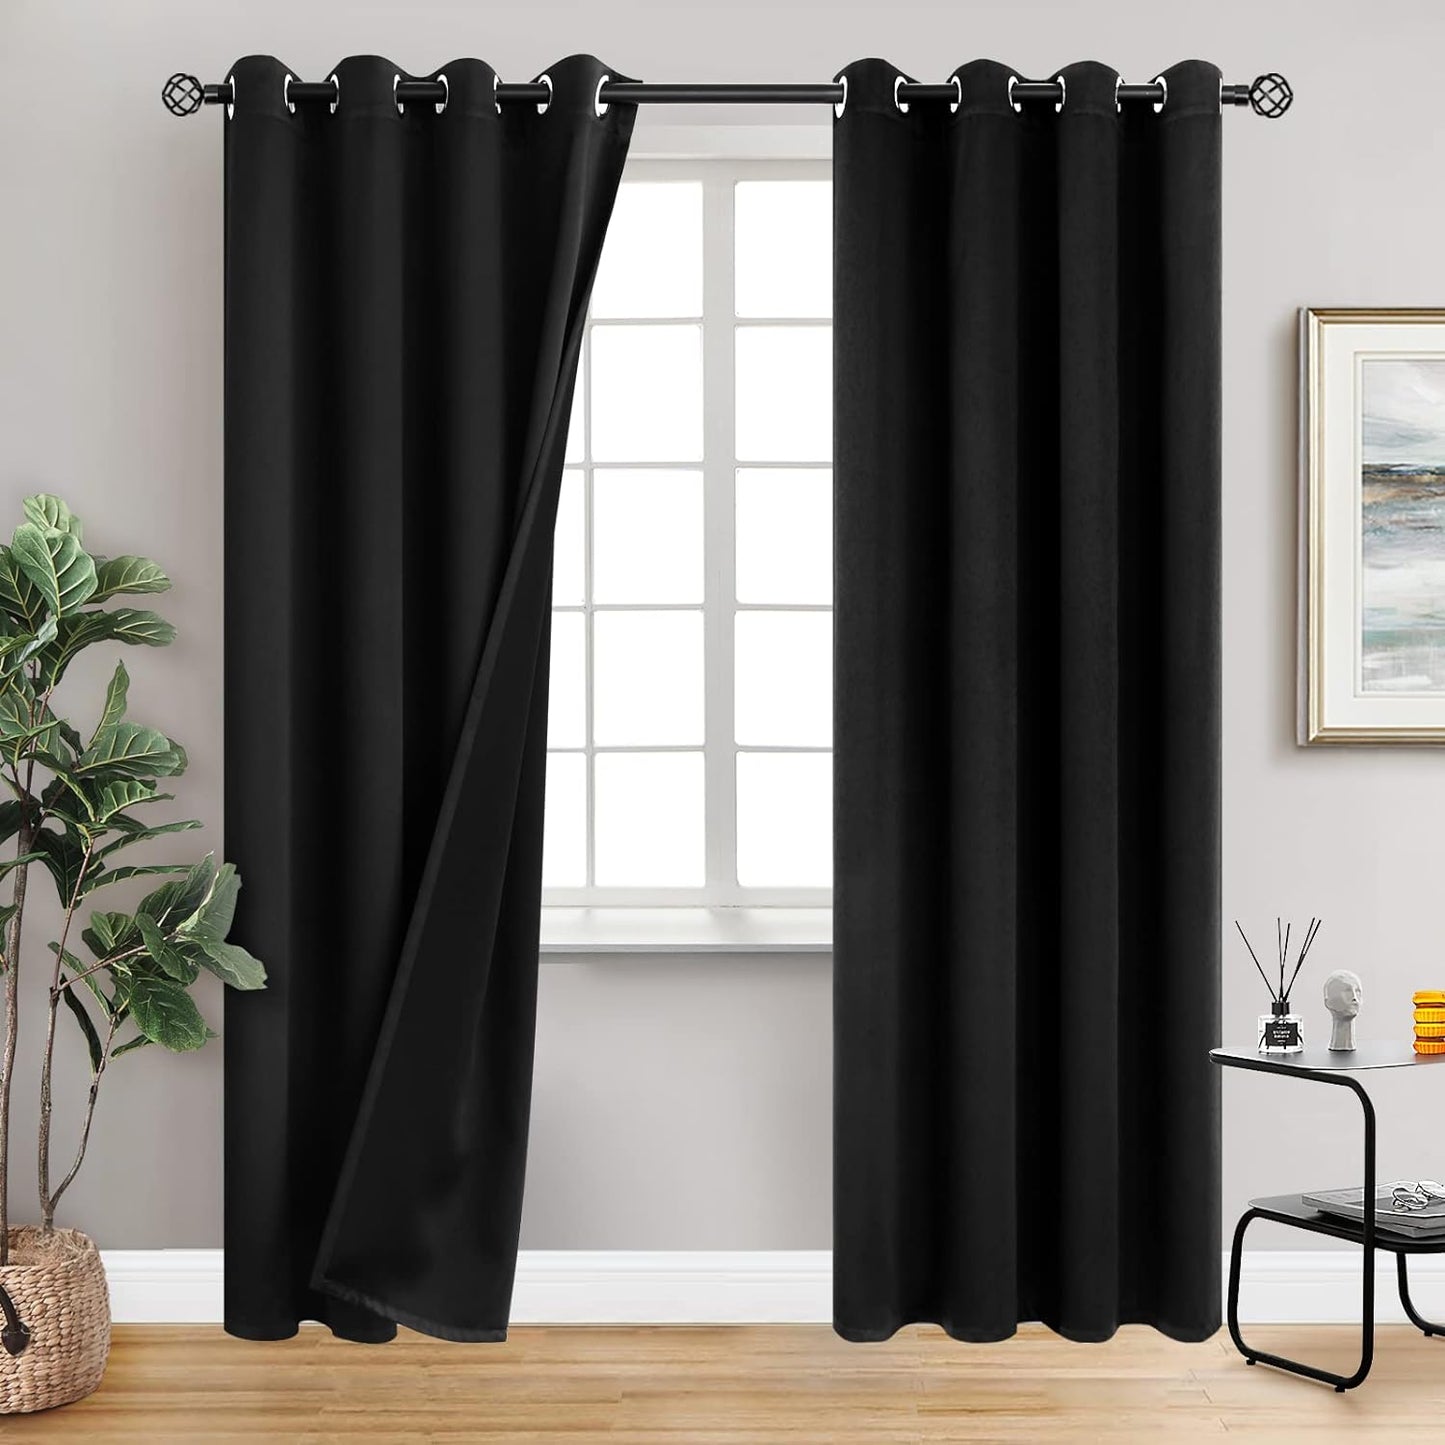 Youngstex Black 100% Blackout Curtains 63 Inches for Bedroom Thermal Insulated Total Room Darkening Curtains for Living Room Window with Black Back Grommet, 2 Panels, 42 X 63 Inch  YoungsTex Black 52W X 95L 